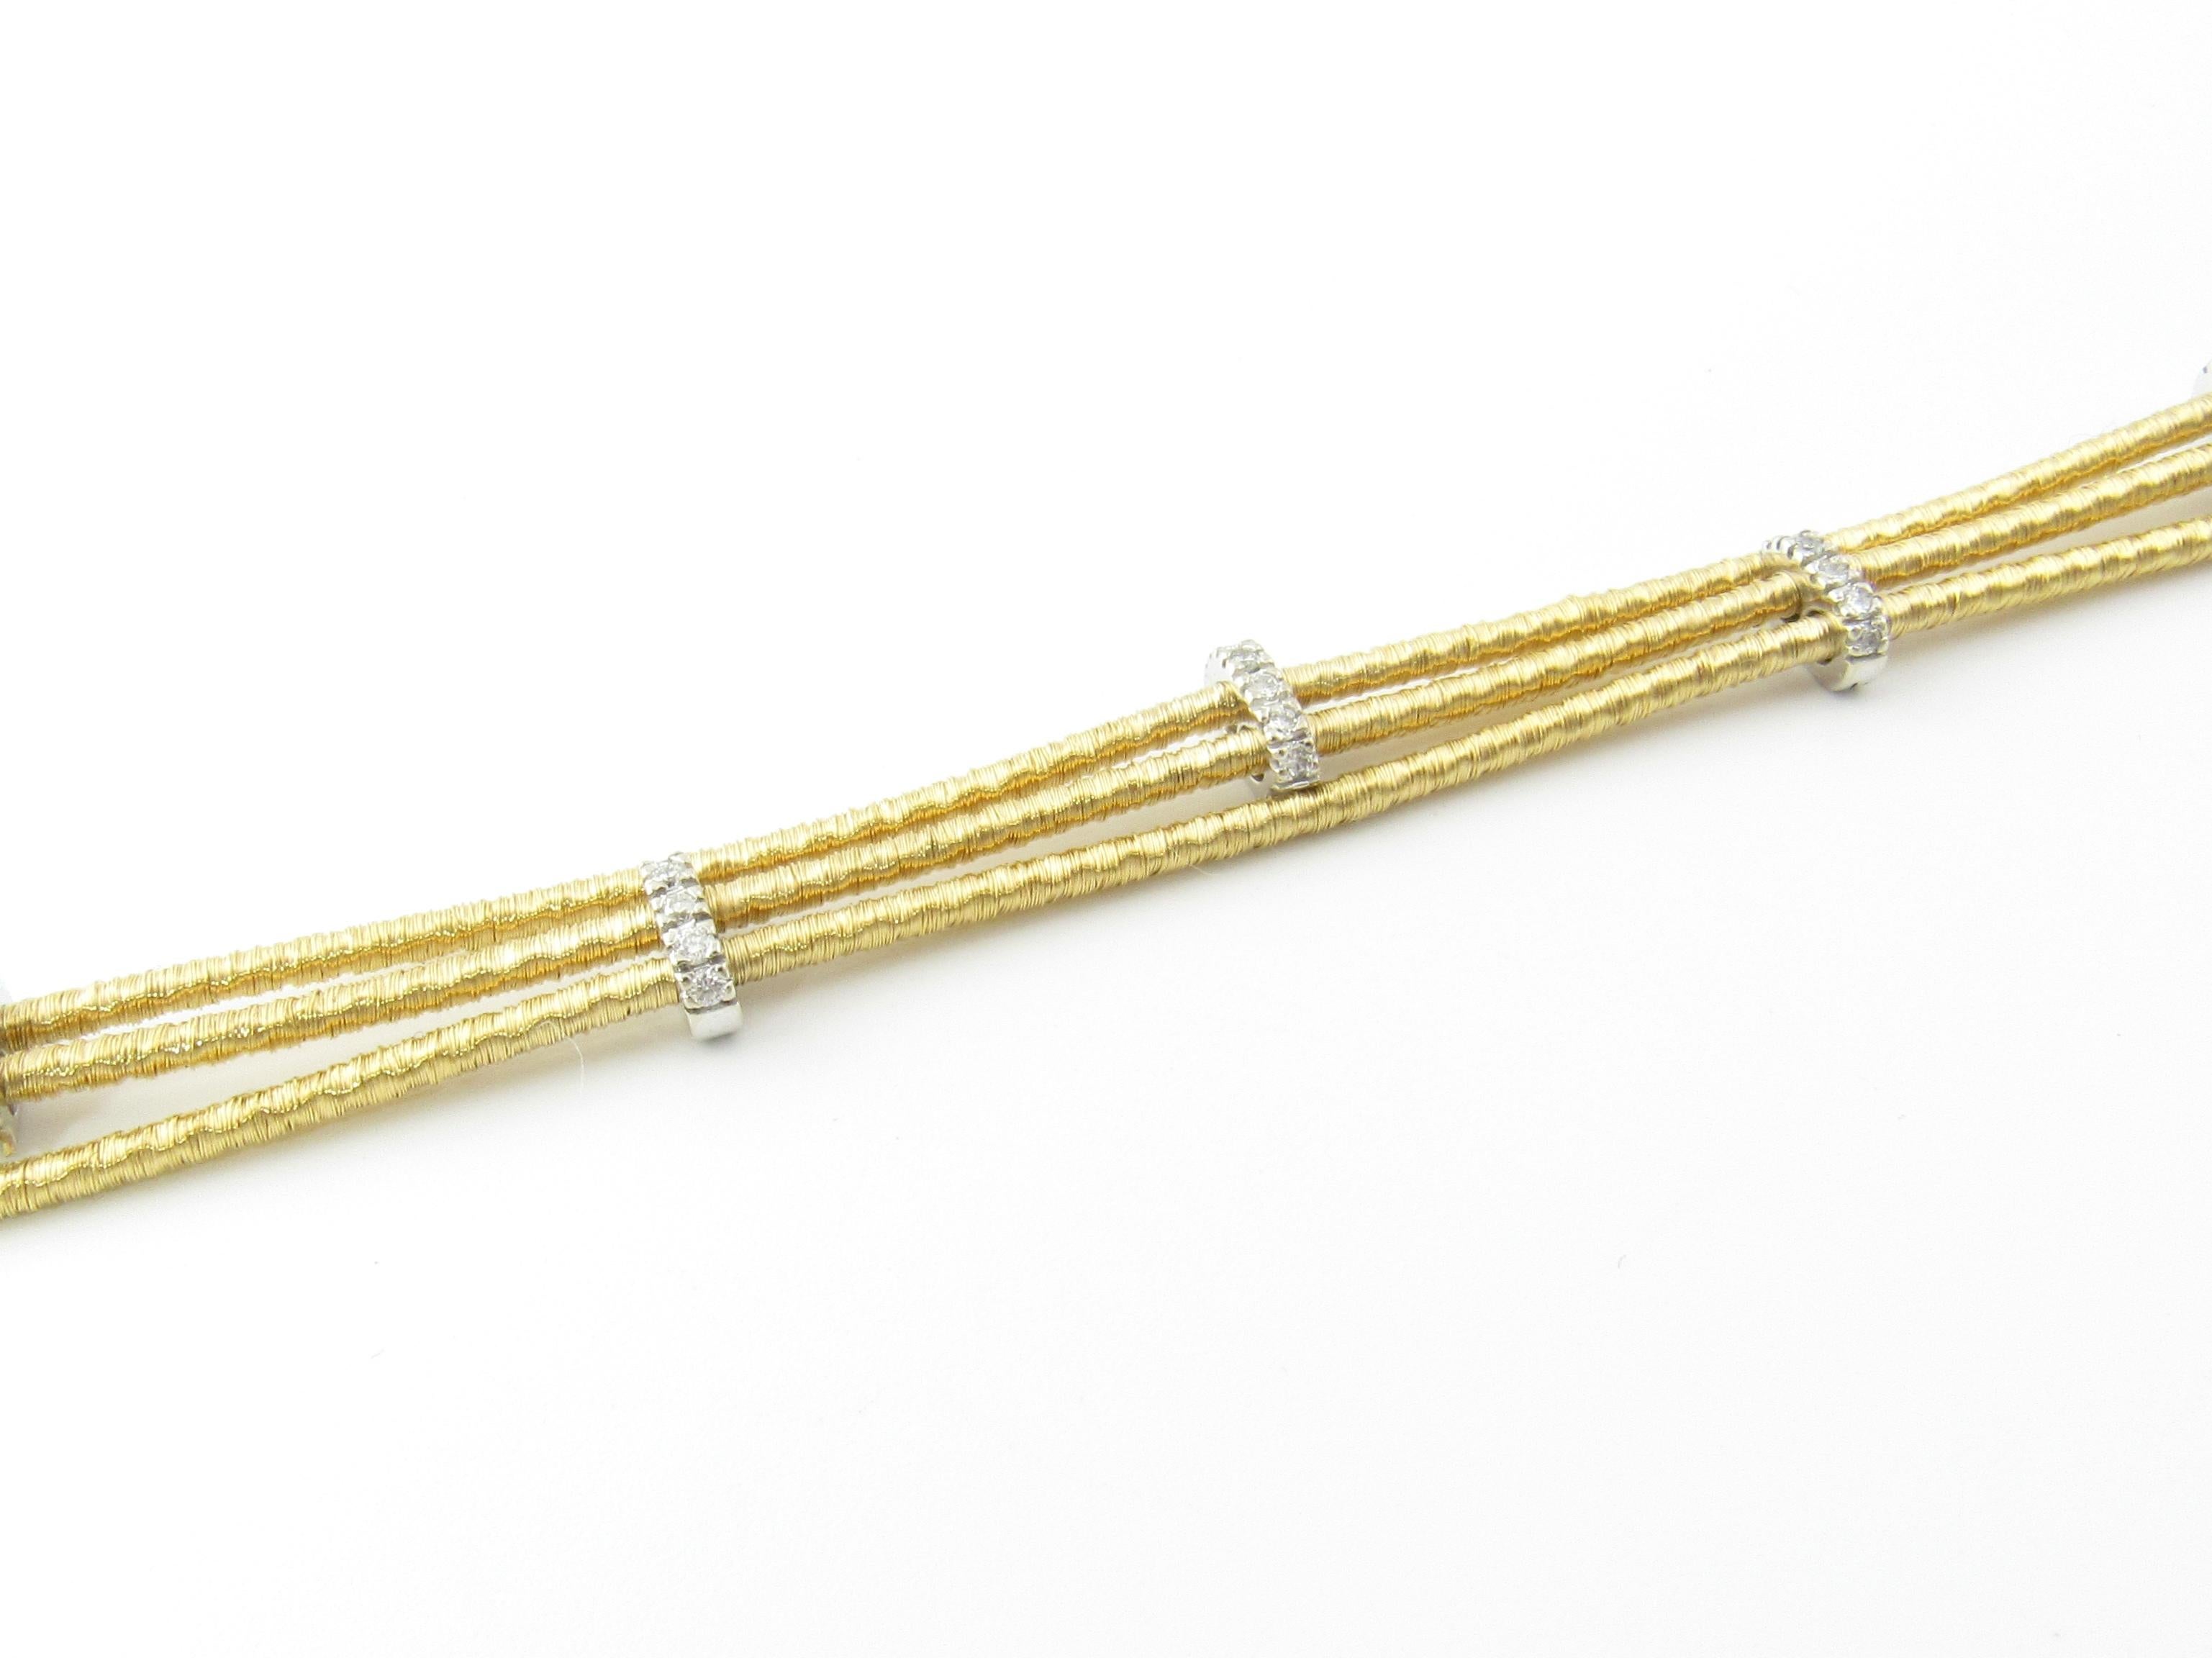 Vintage 18 Karat Yellow and White Gold and Diamond Bracelet

This lovely triple cable bracelet is decorated 30 round brilliant cut diamonds set in beautifully detailed 18K white gold. Cables are 18K Yellow Gold Width: 9 mm. Safety